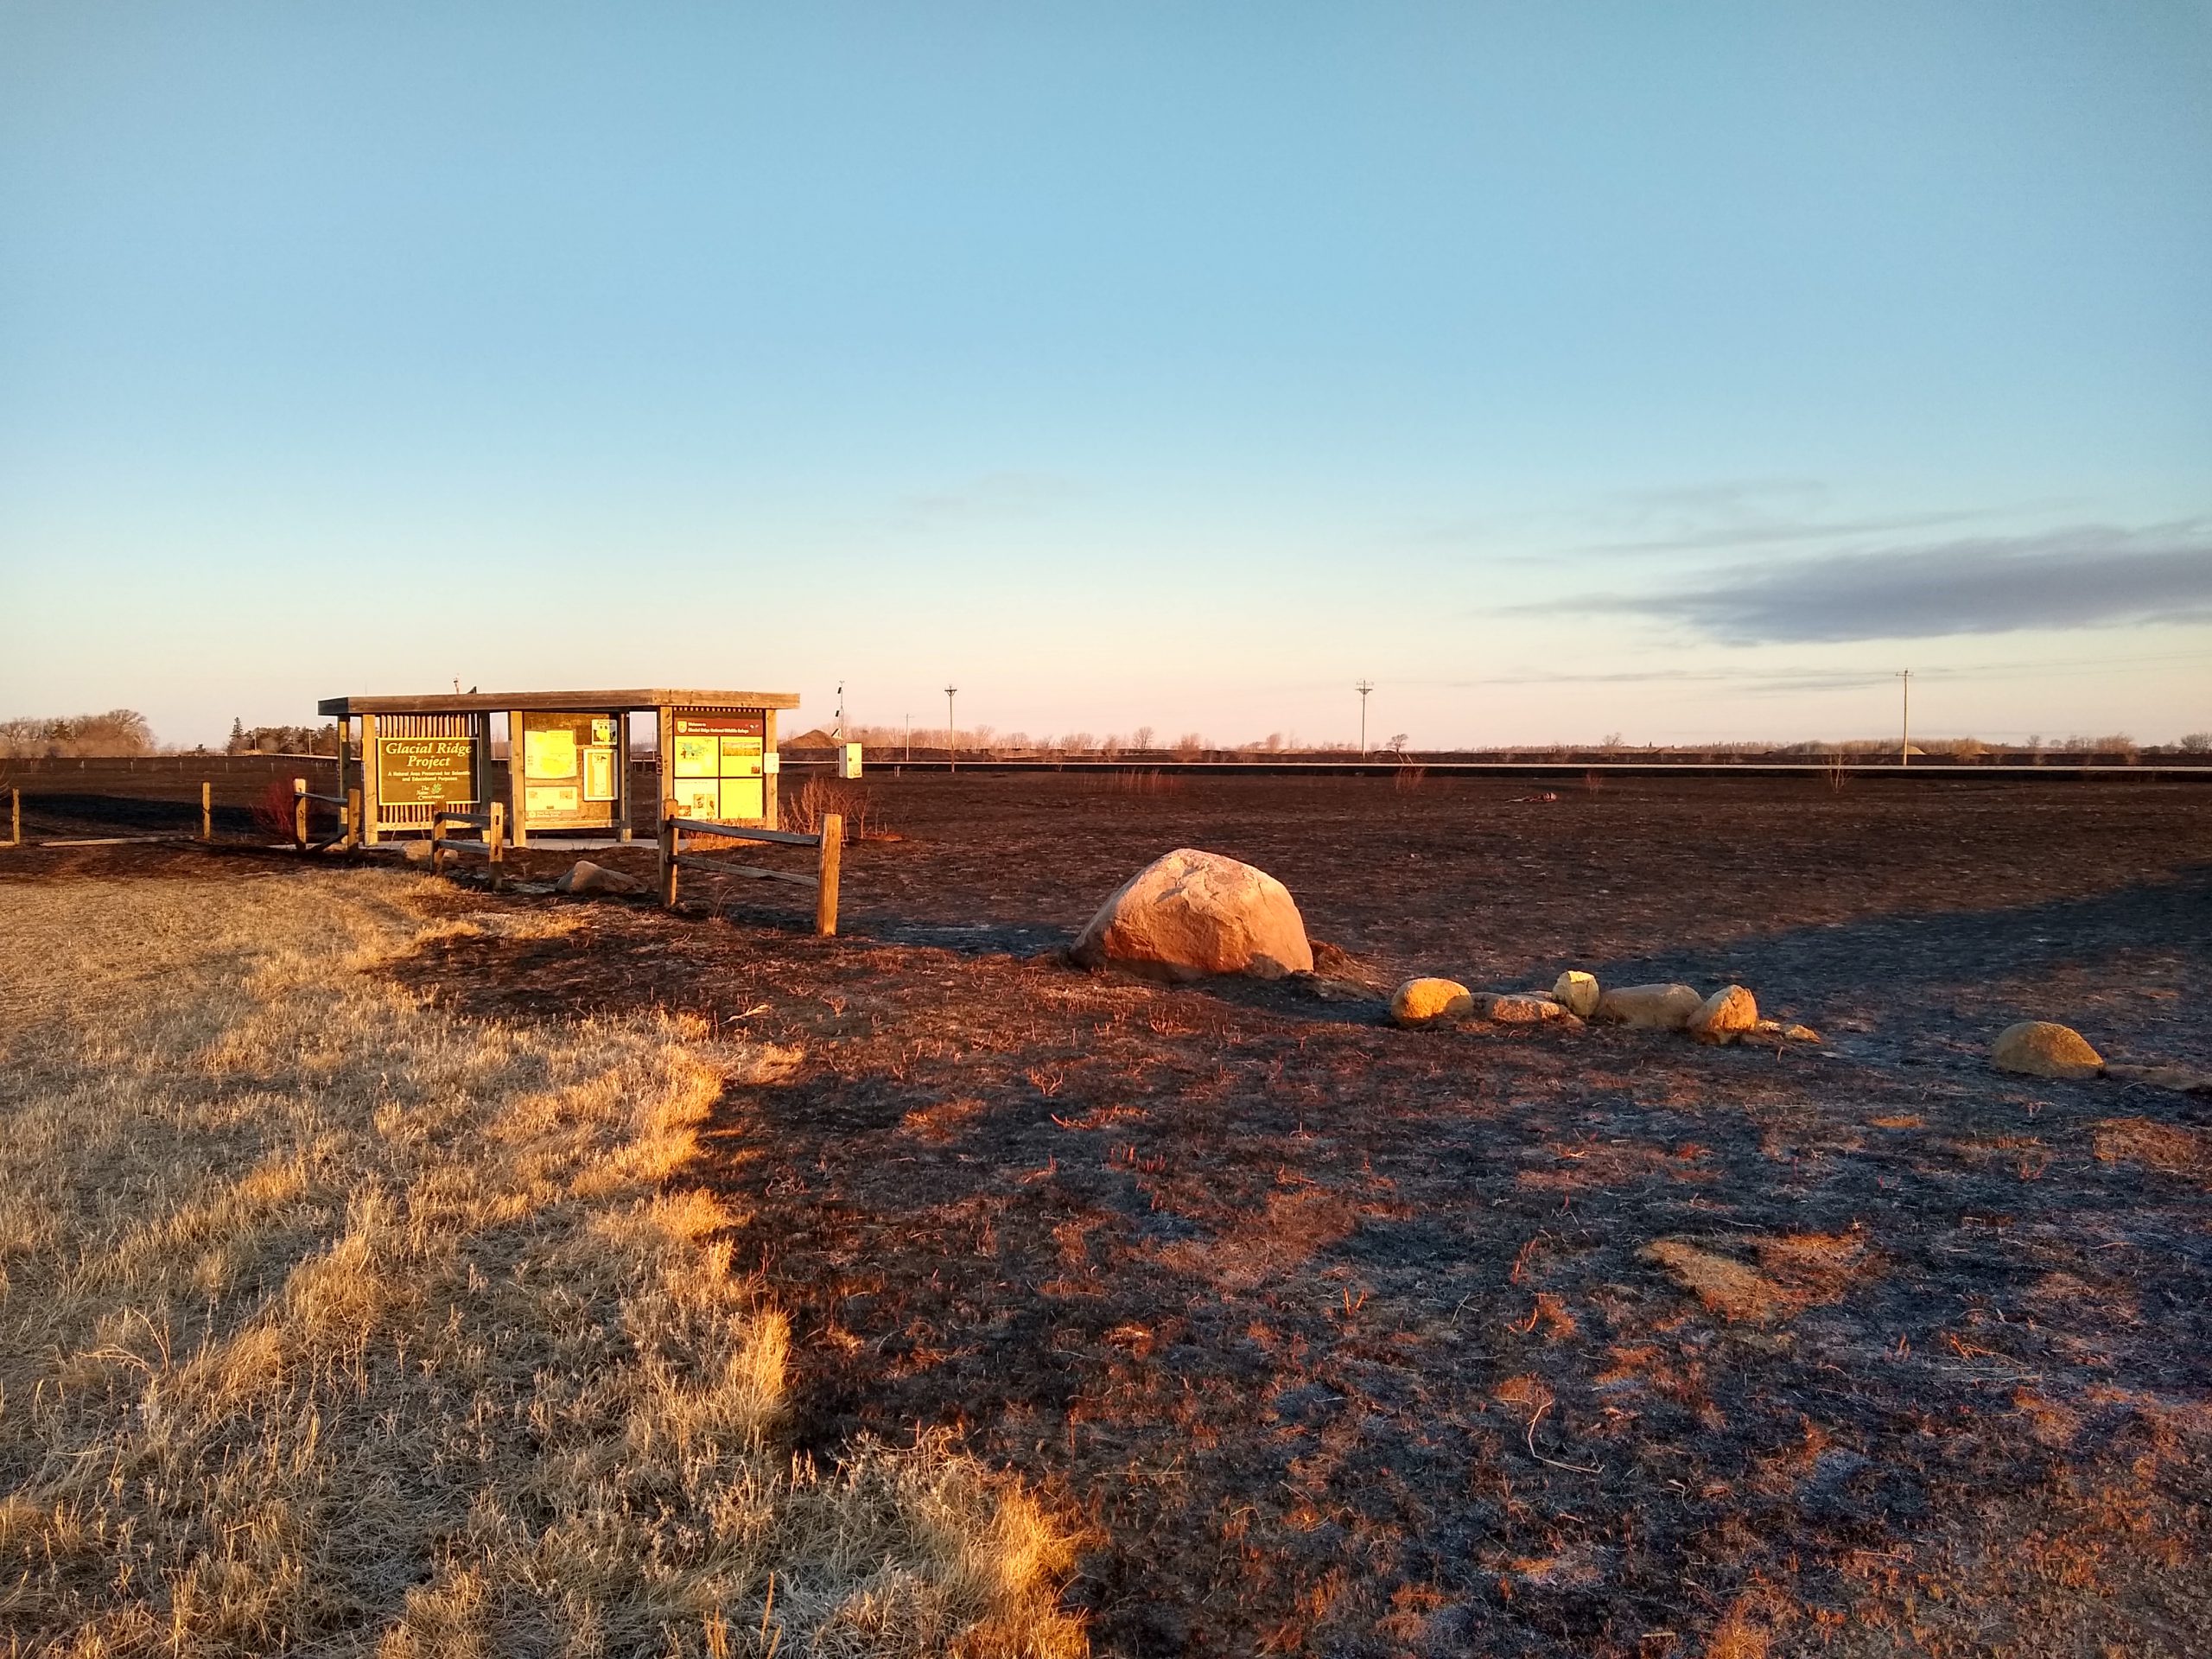 Kiosks stand between burned and unburned field.